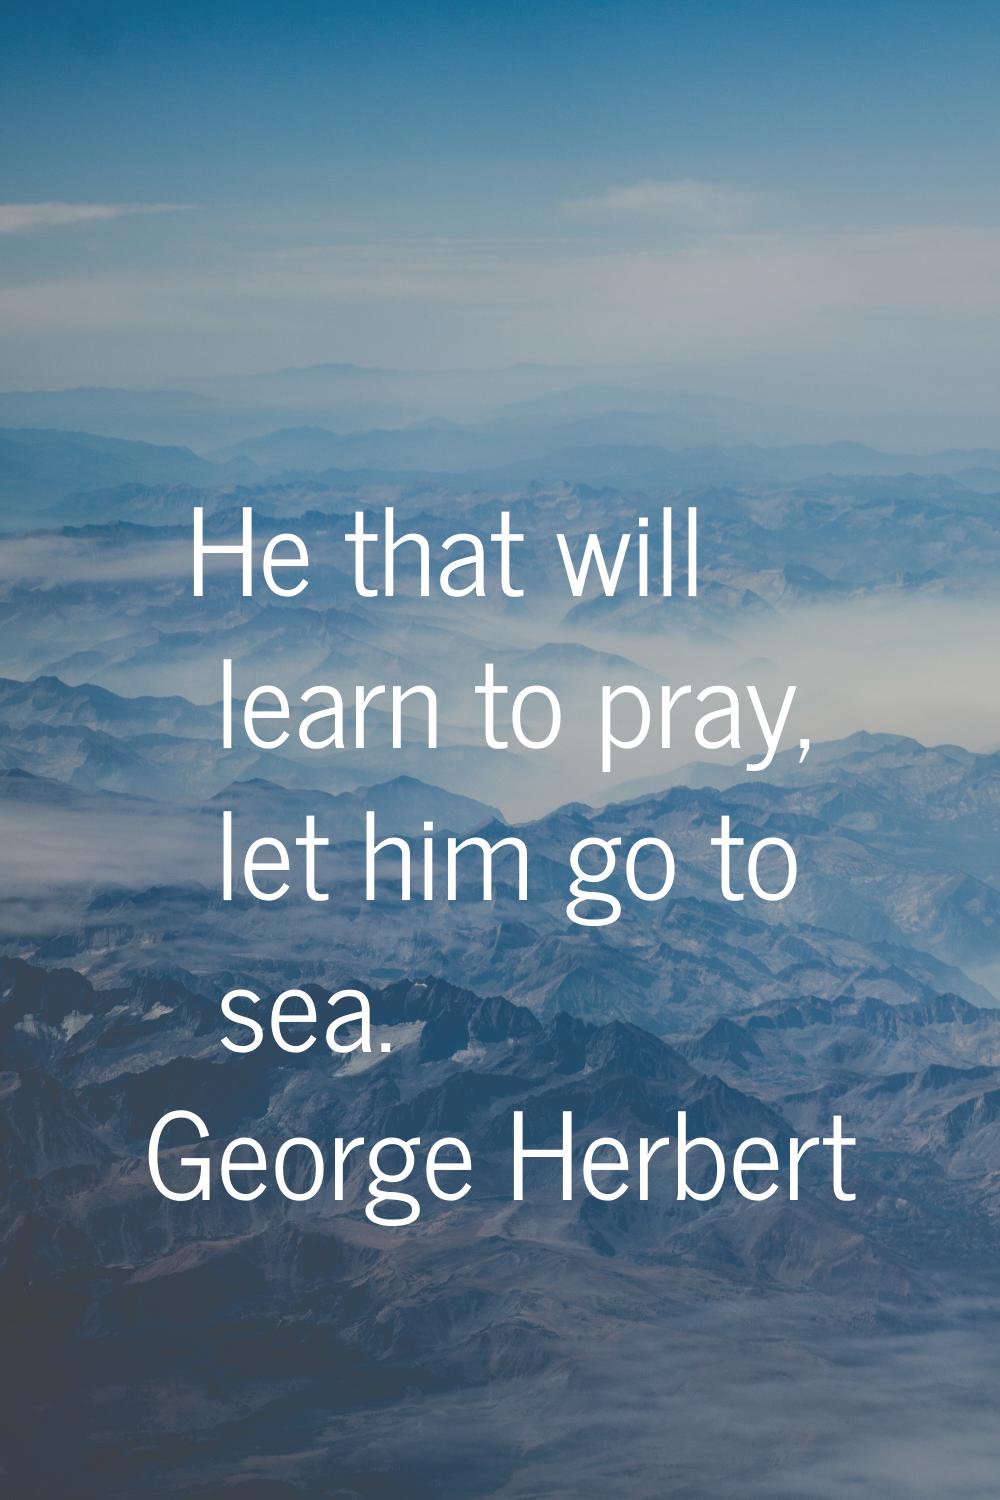 He that will learn to pray, let him go to sea.